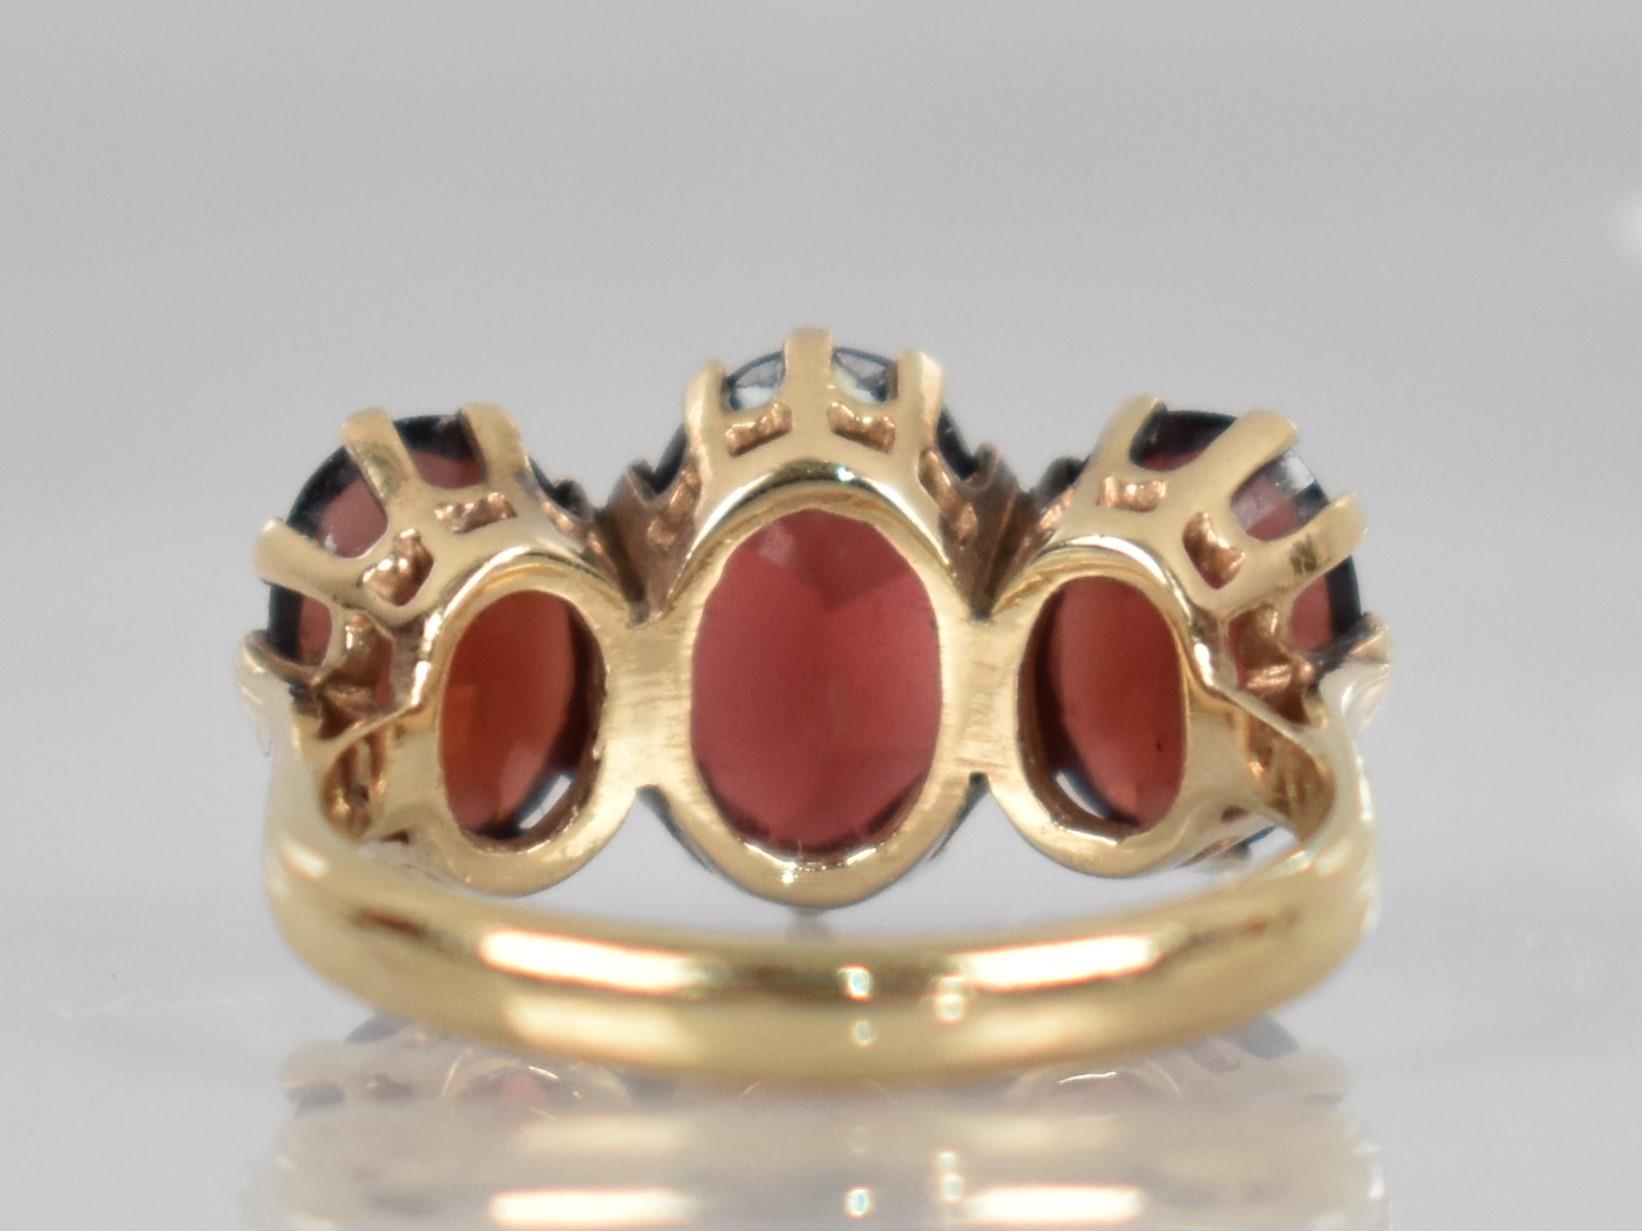 A 9ct Gold and Garnet Dress Ring, Central Oval Cut Stone Measuring 9.9mm by 6.5mm, Claw and - Image 2 of 3